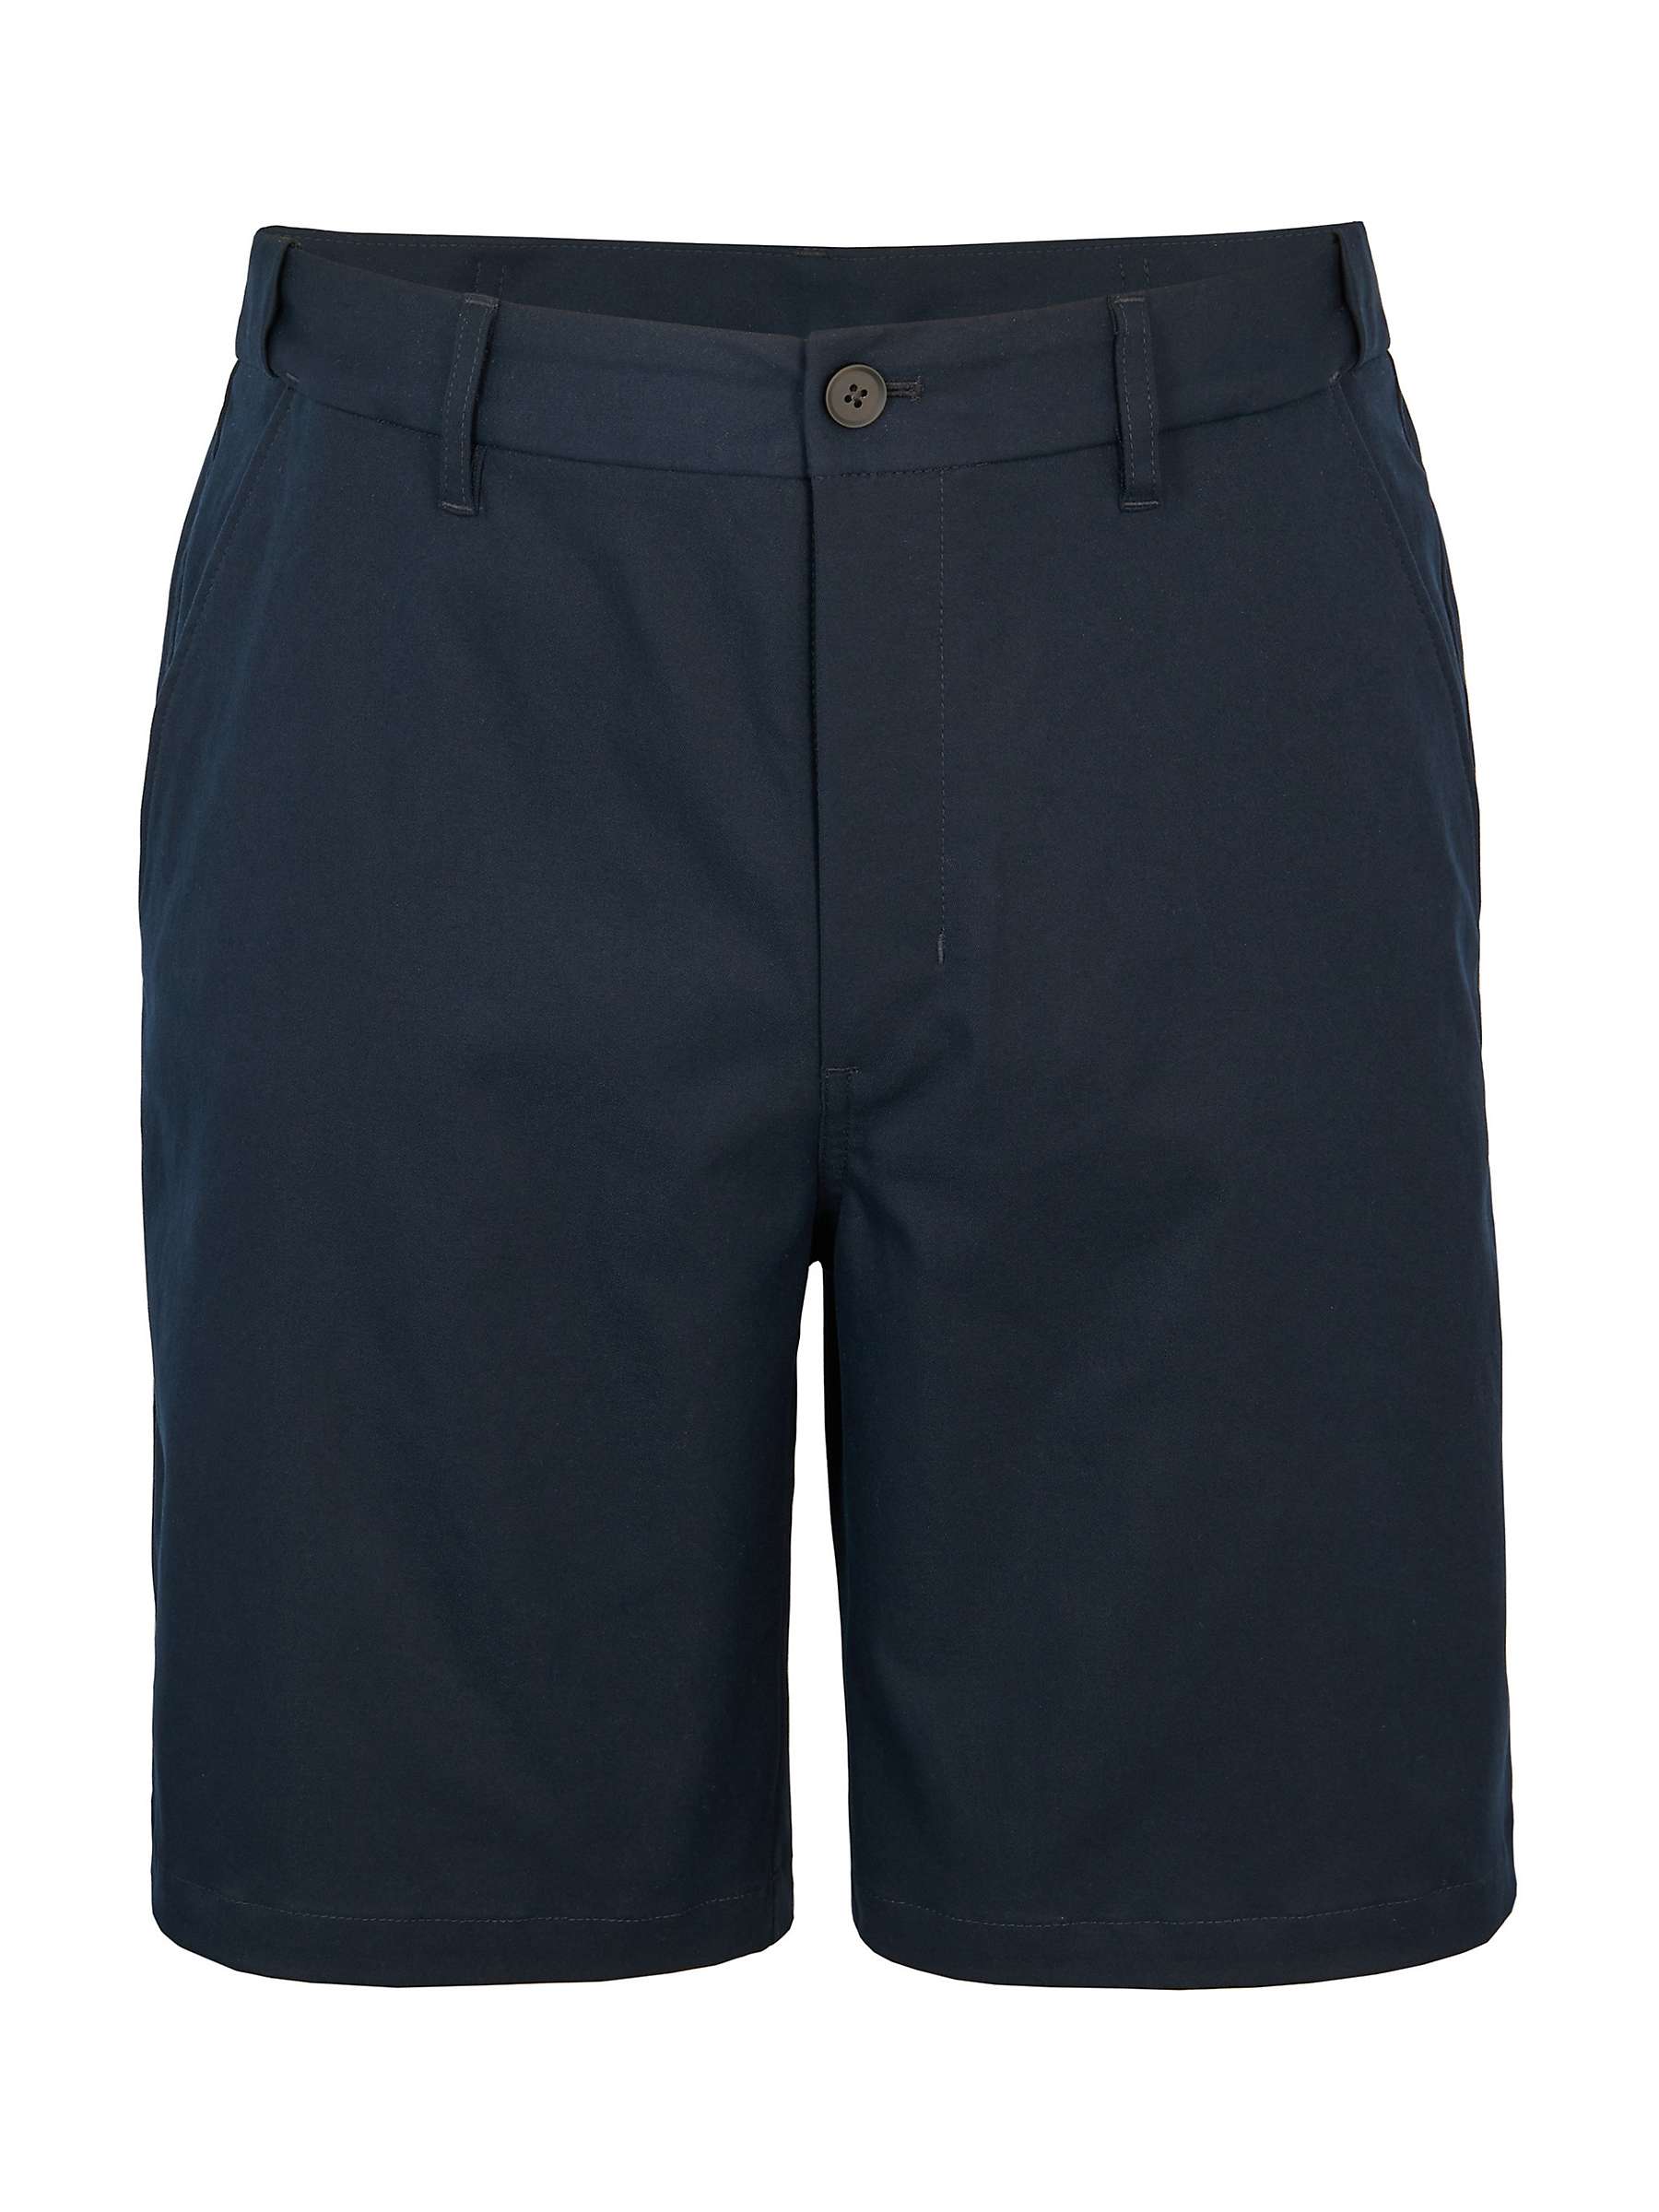 Buy Rohan District Chino Shorts Online at johnlewis.com